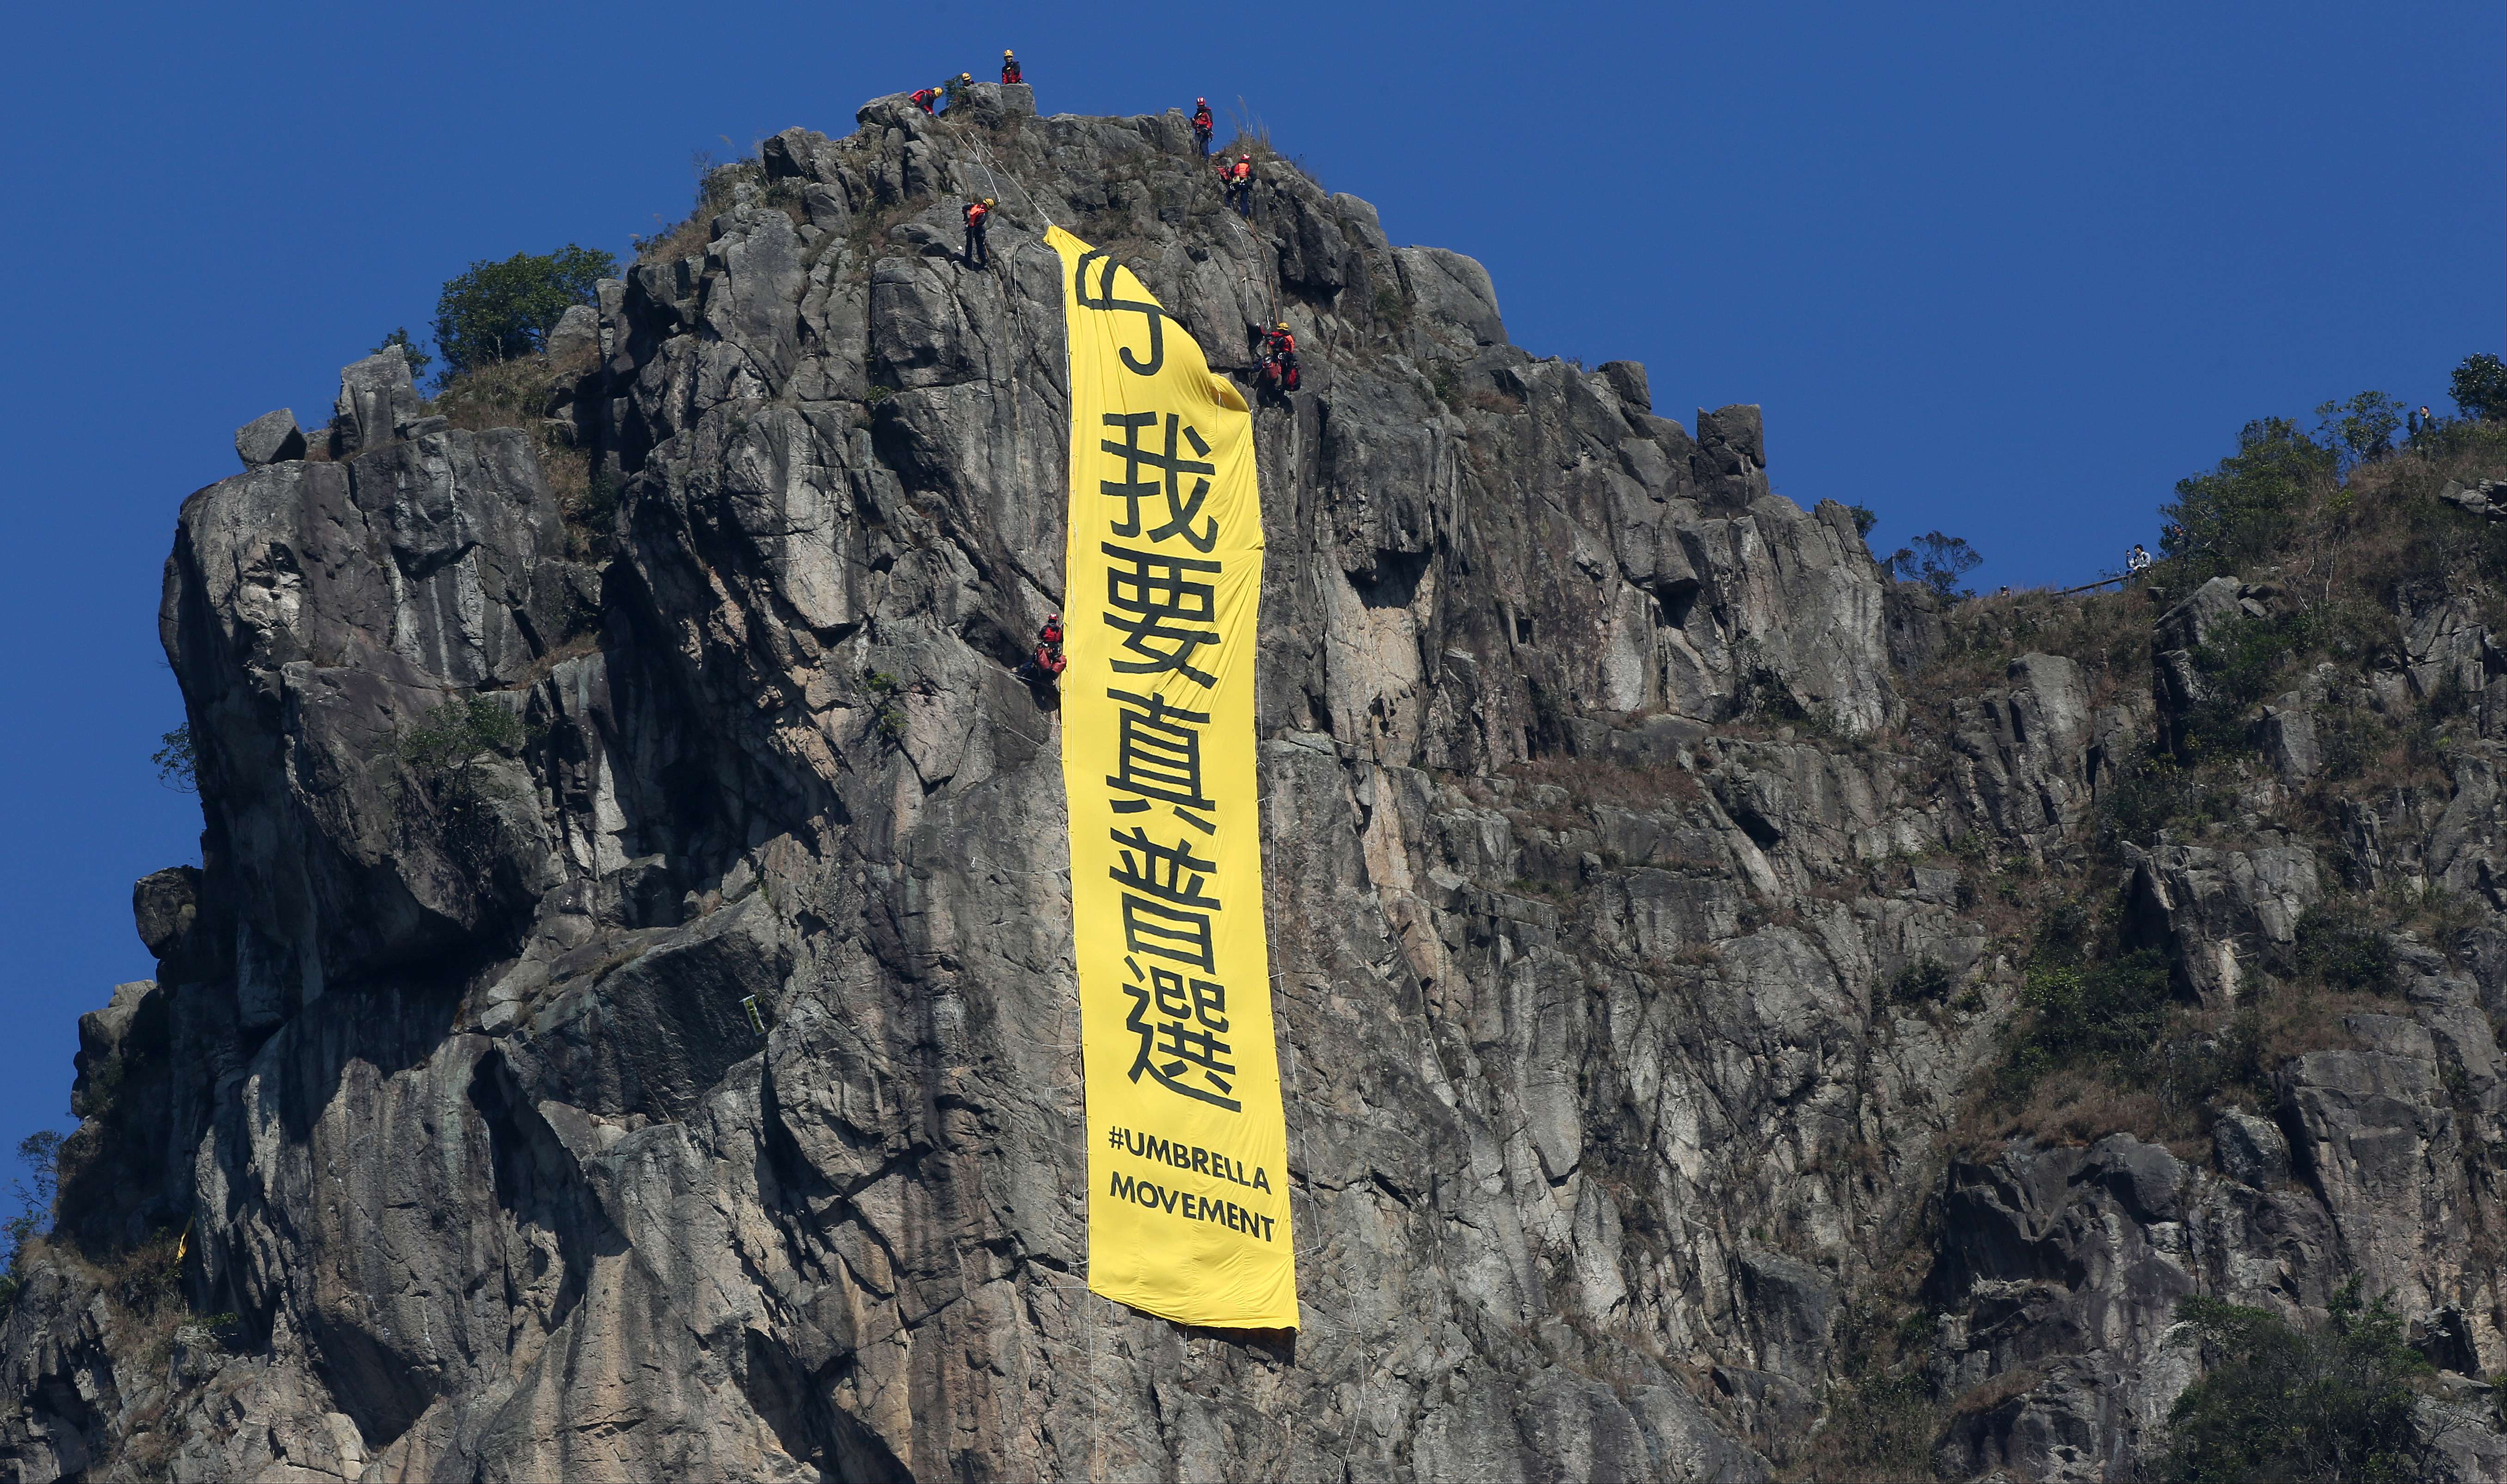 Workers take down a banner demanding “genuine universal suffrage” from atop Lion Rock. Photo: Nora Tam